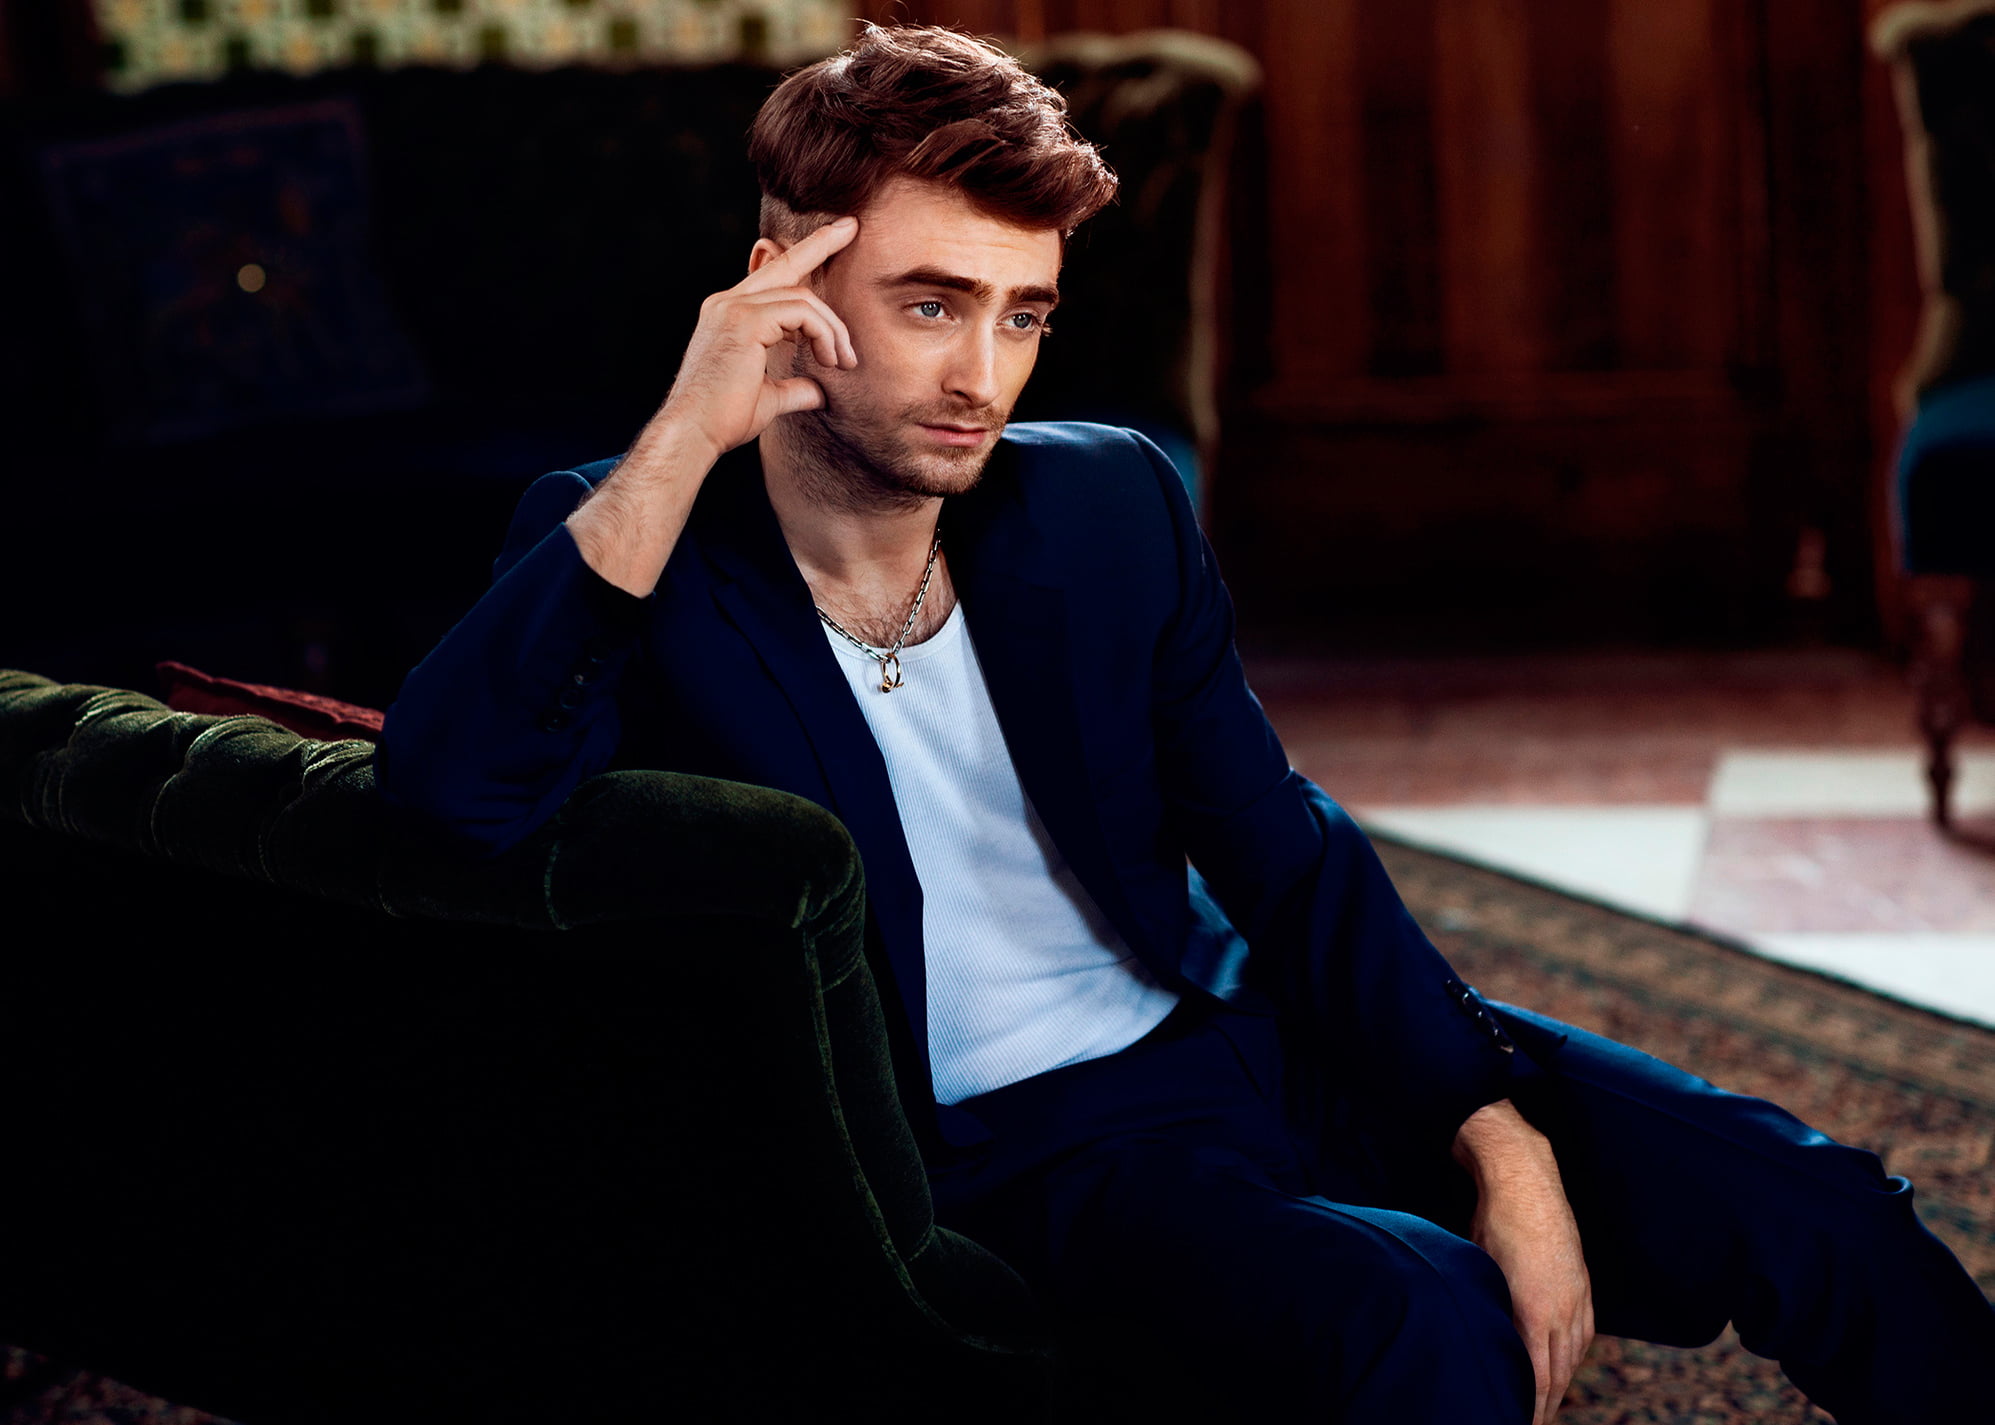 photoshoot, Daniel Radcliffe, Essential Homme, sitting, one person